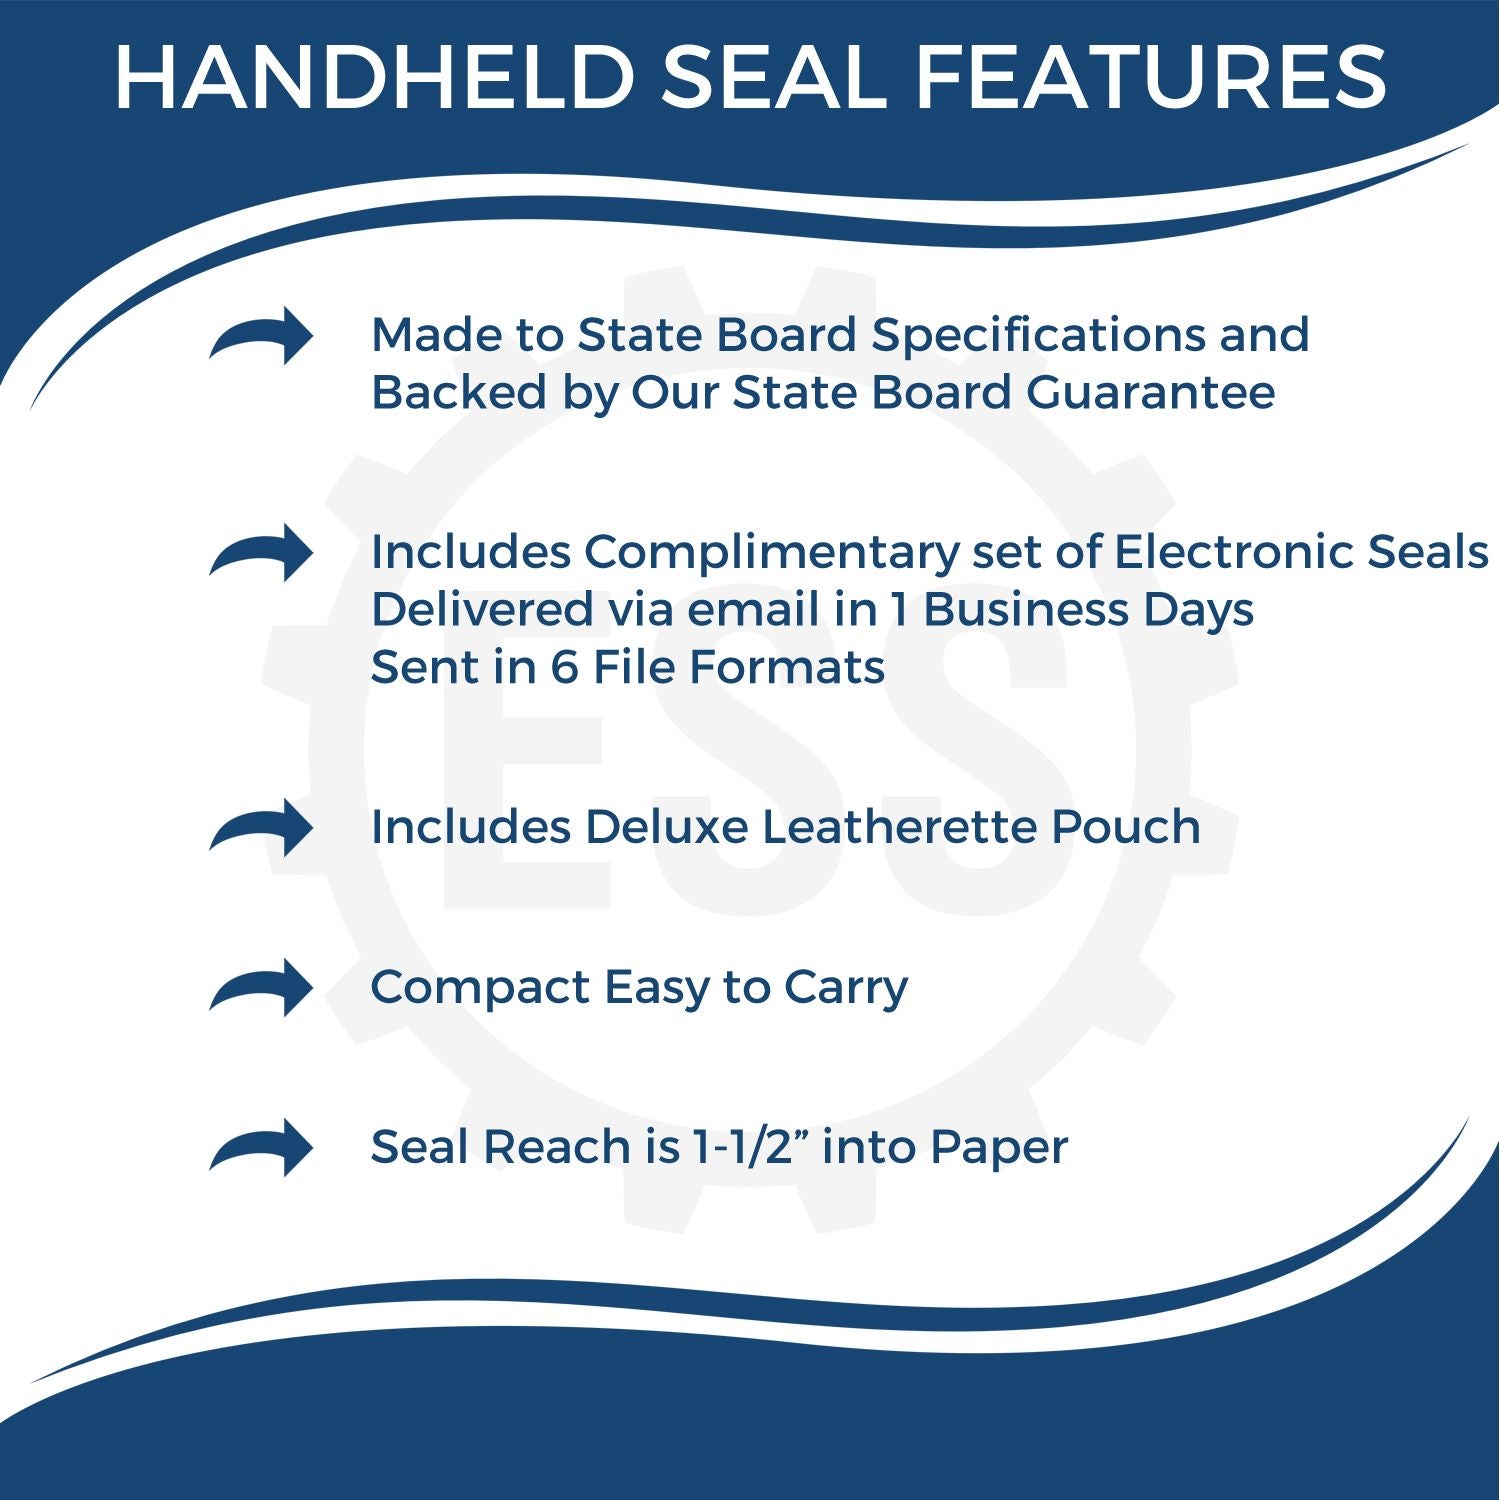 A picture of an infographic highlighting the selling points for the Handheld New York Land Surveyor Seal